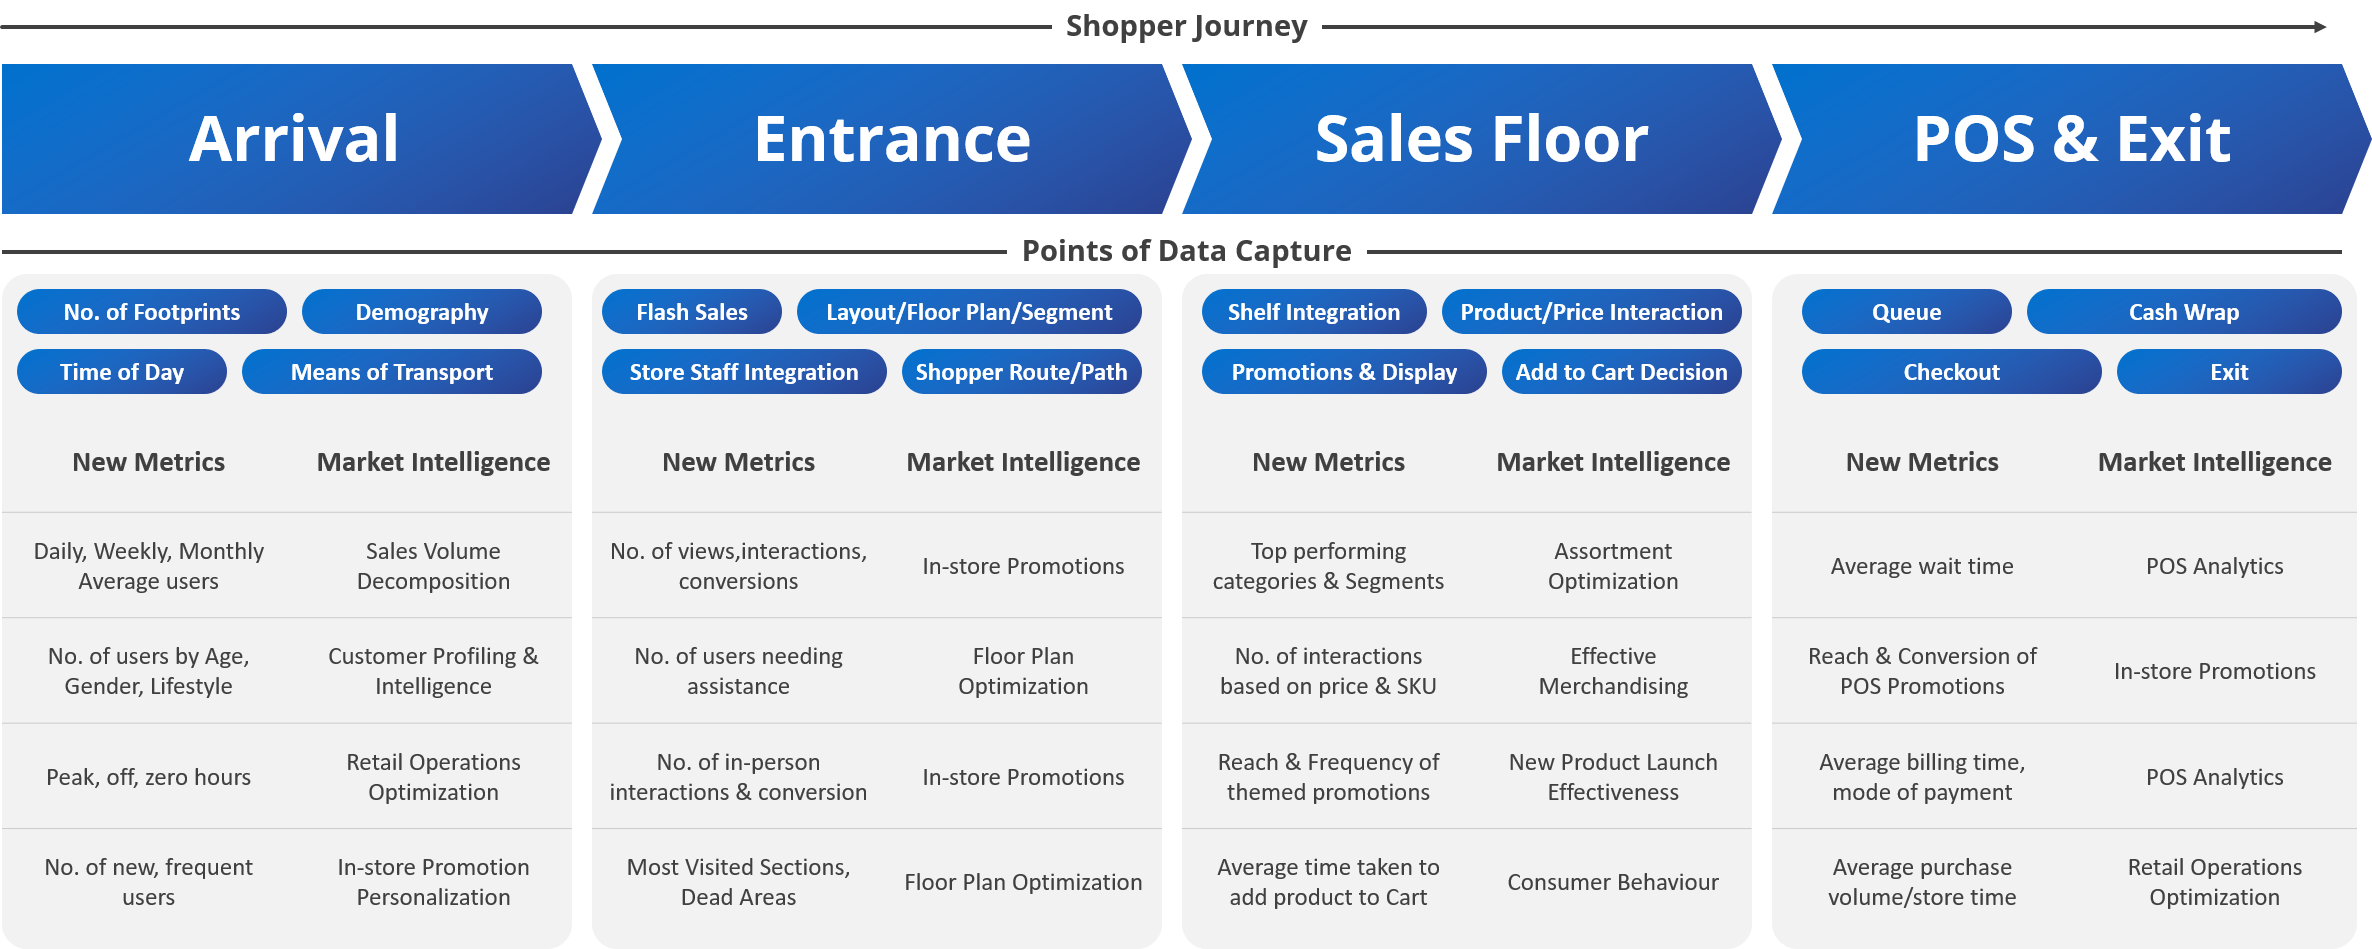 Shoppers Journey Mapping & Data Collection - Innova Solutions Whitepaper